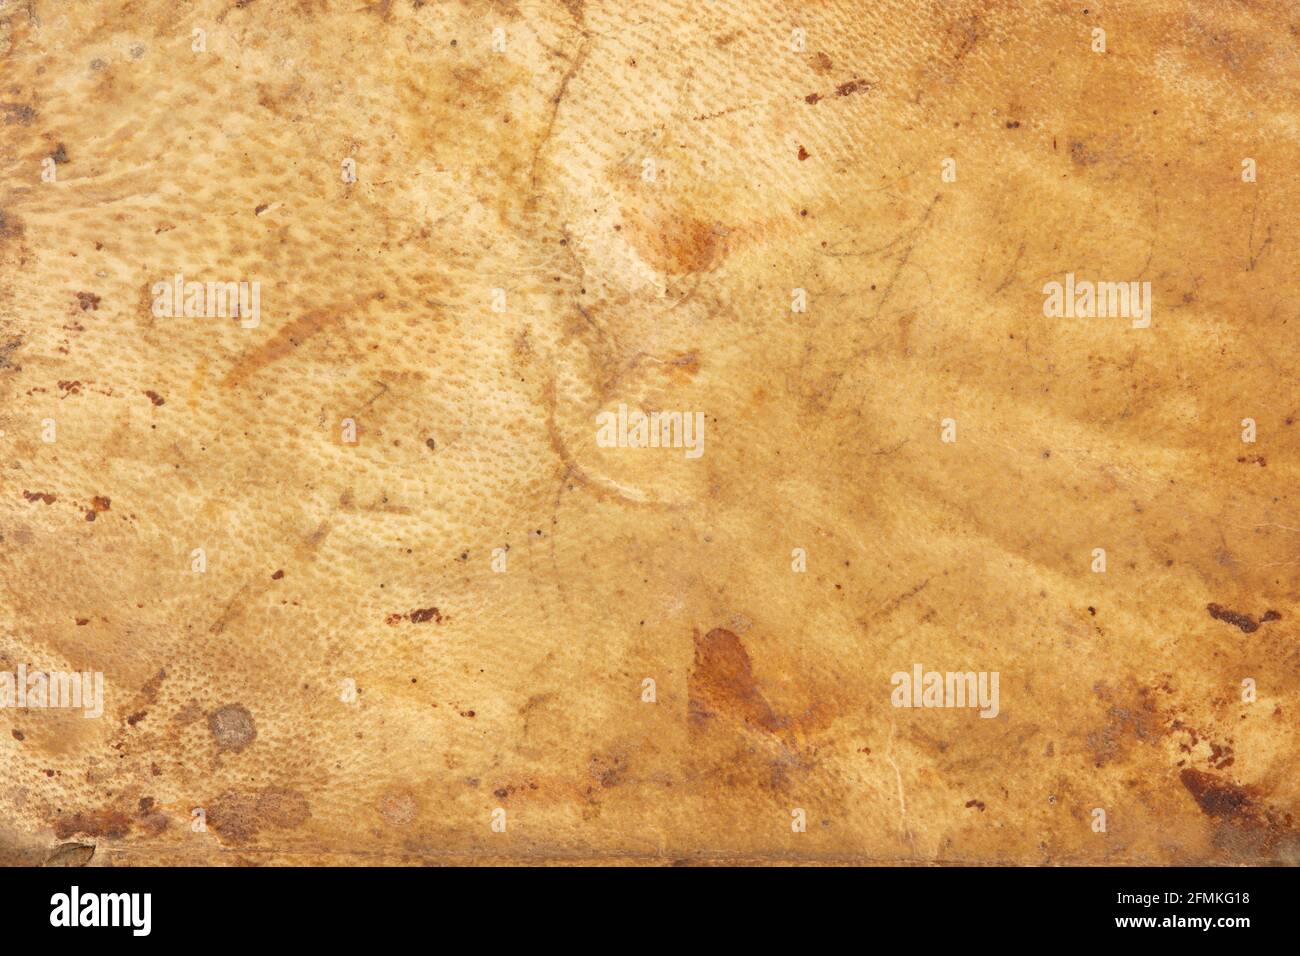 Old parchment leather texture background Stock Photo